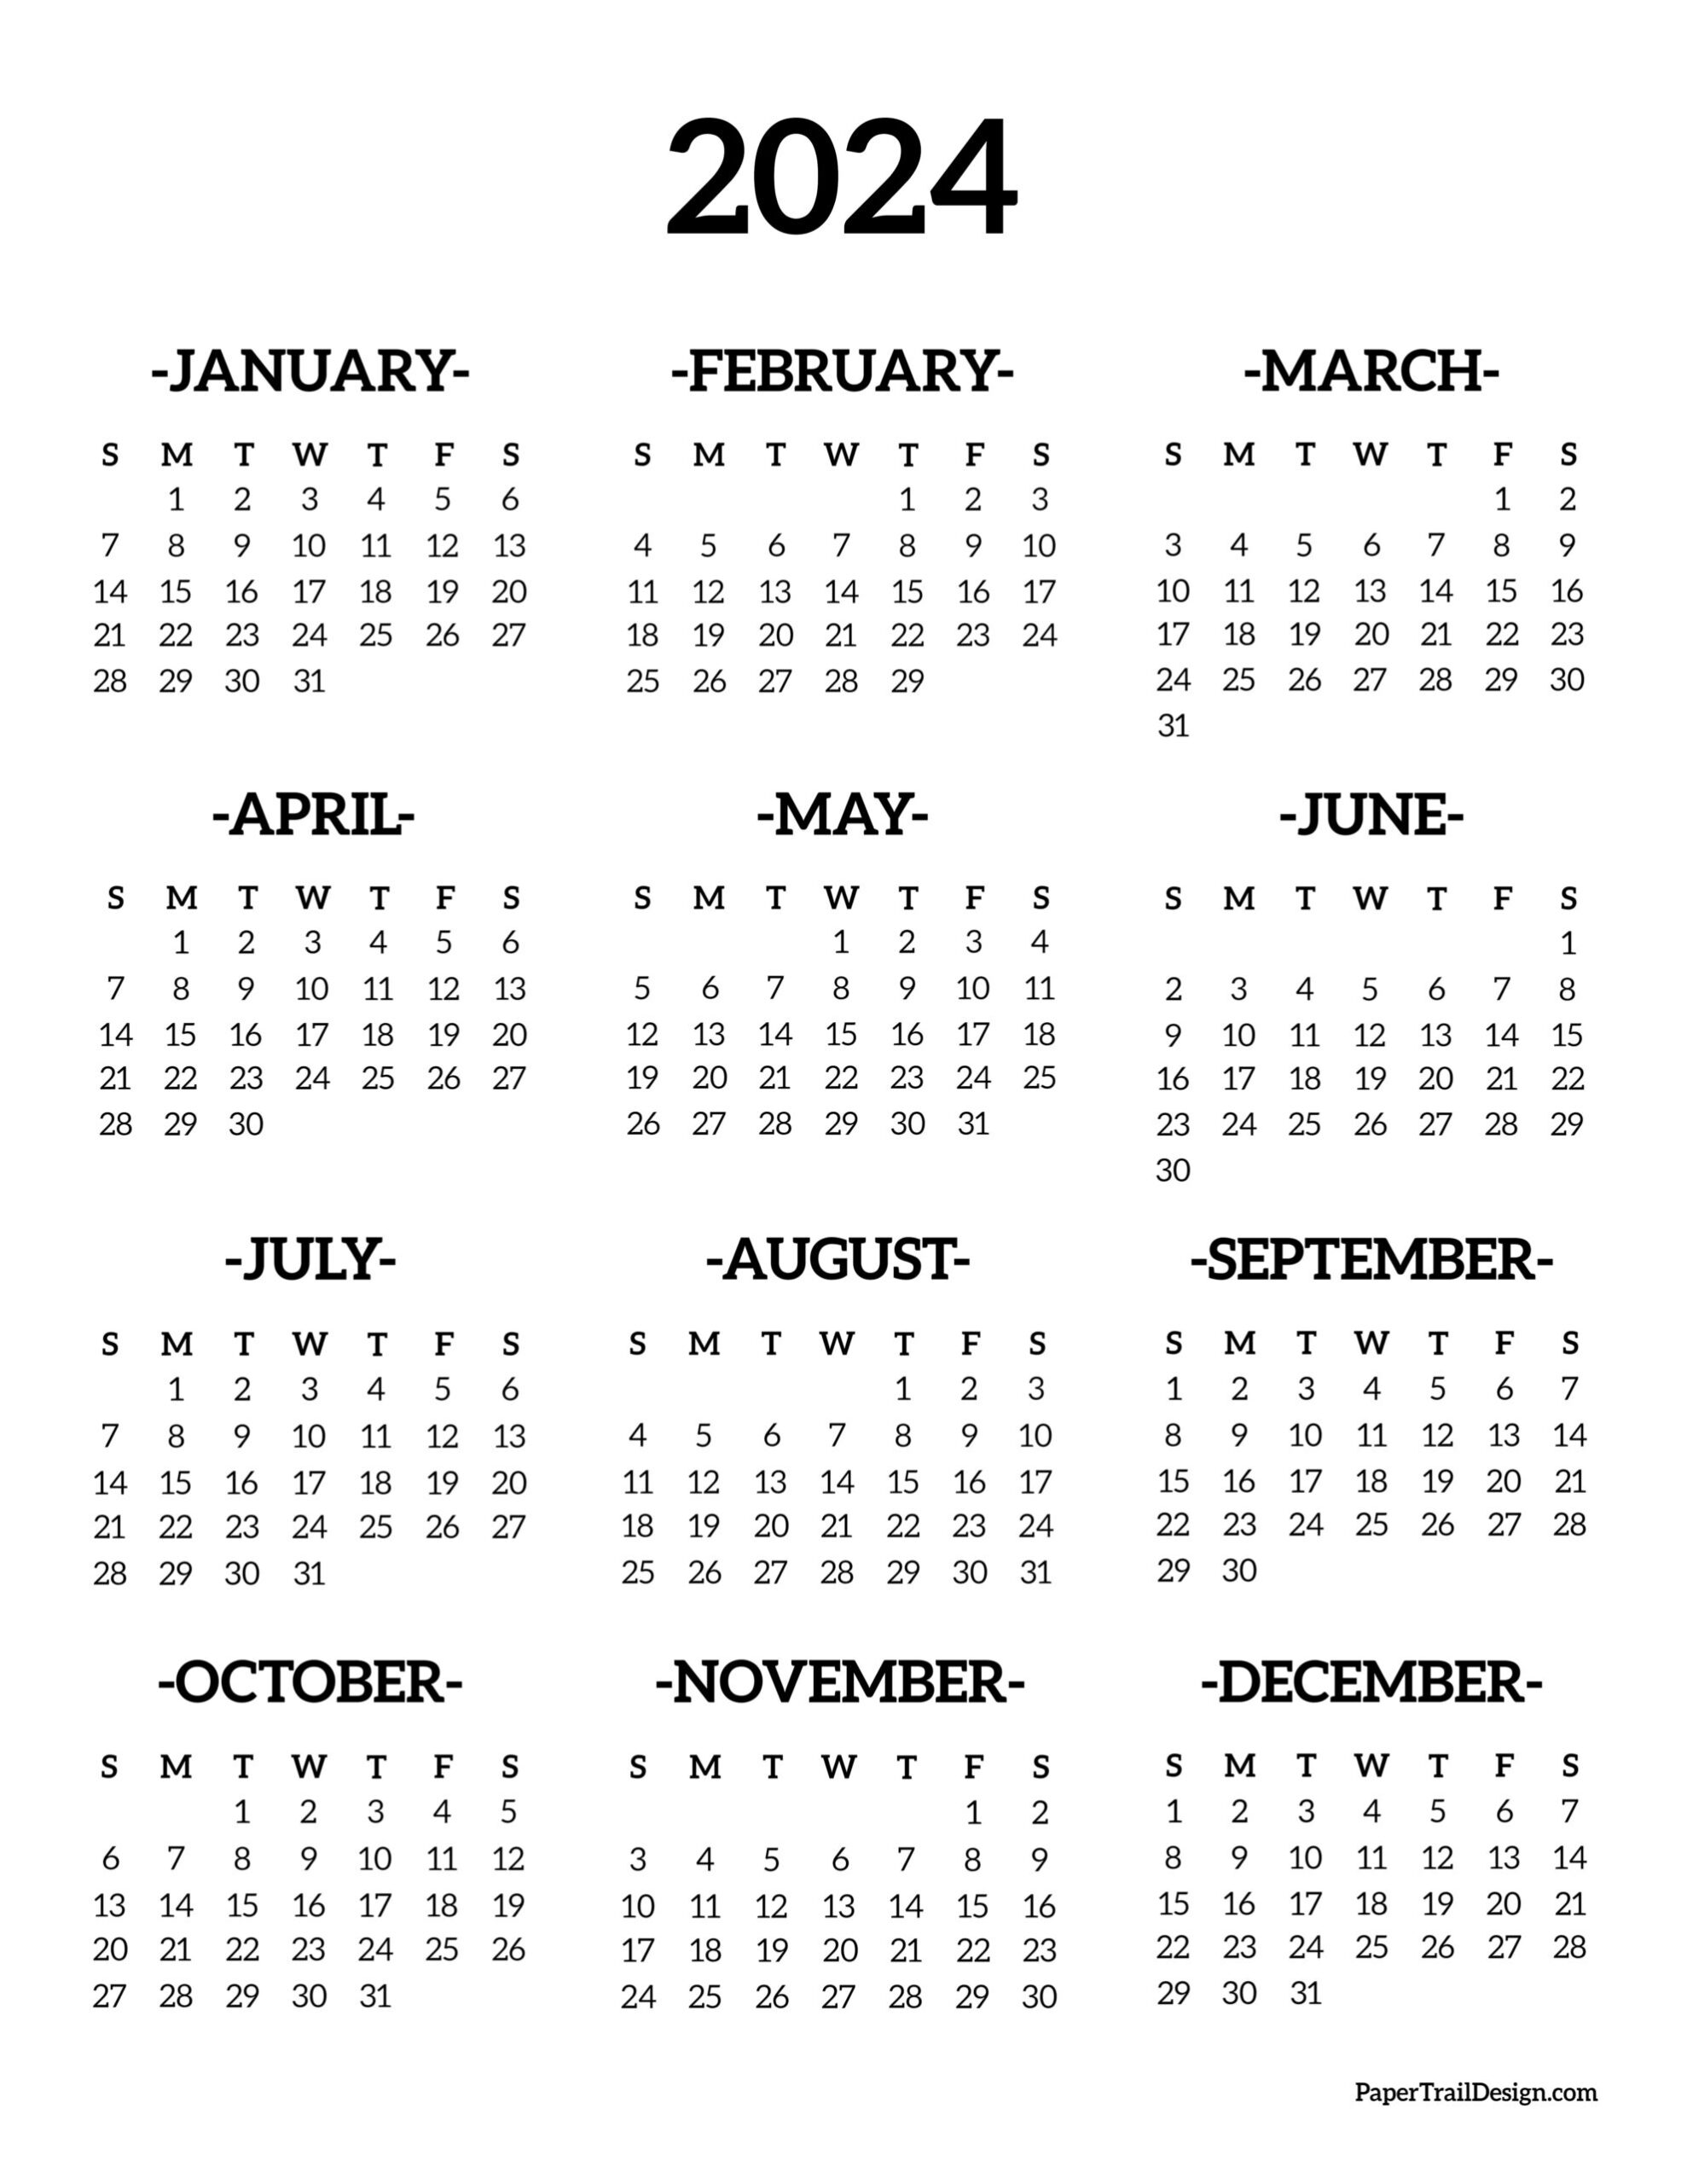 Calendar 2024 Printable One Page - Paper Trail Design | Printable Calendar 2024 Yearly Free